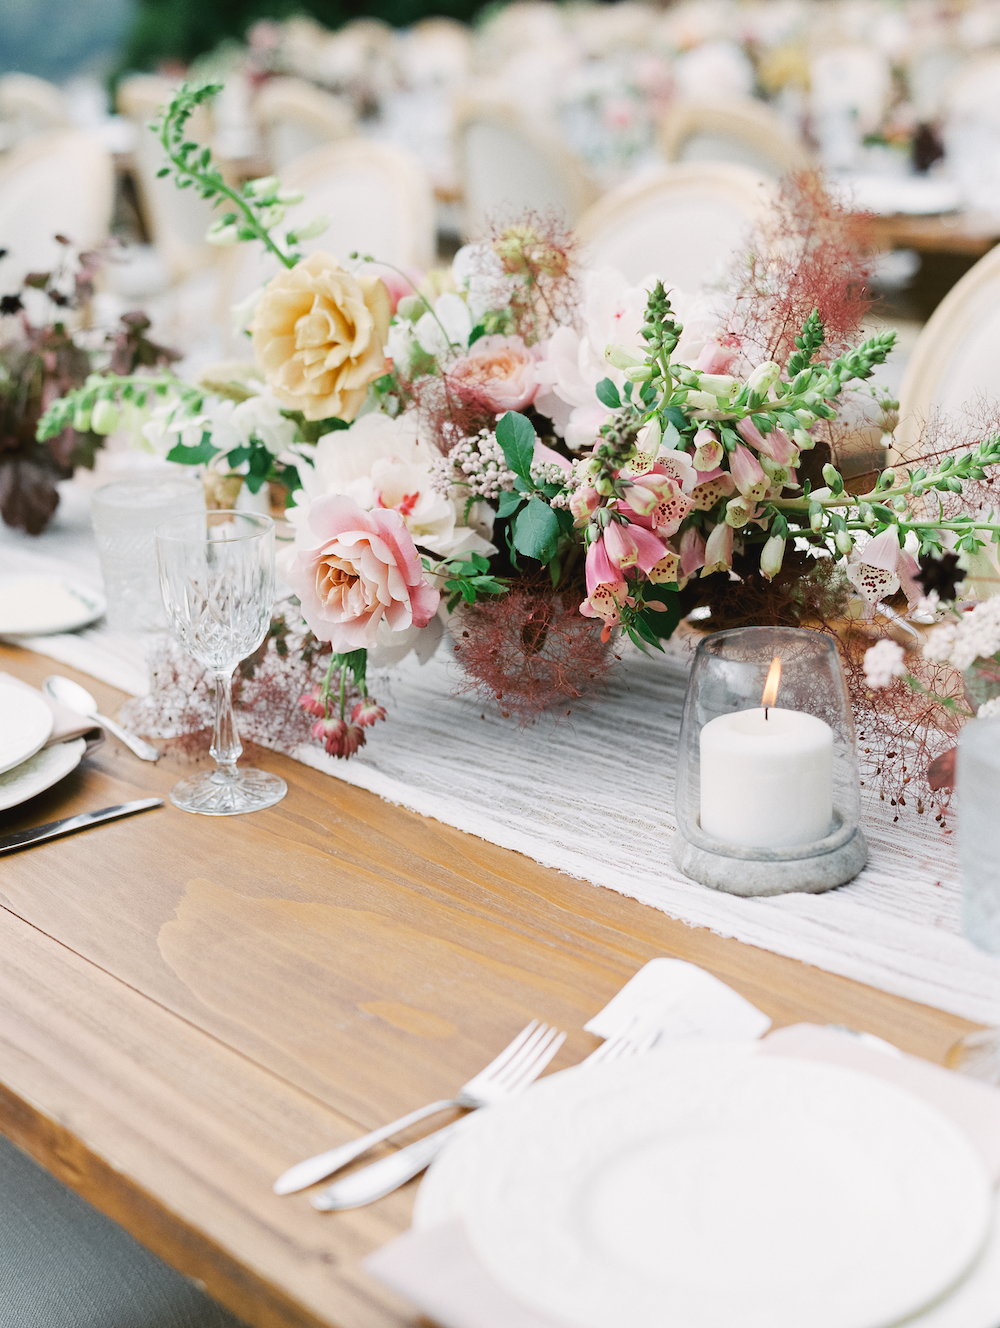  A guest's point-of-view of the tablescape; how lovely to frame conversation and courses with candlelight and a compote of midsummer blooms.&nbsp;  Photo by Michele Beckwith. Event Design by Lambert Floral Studio. 